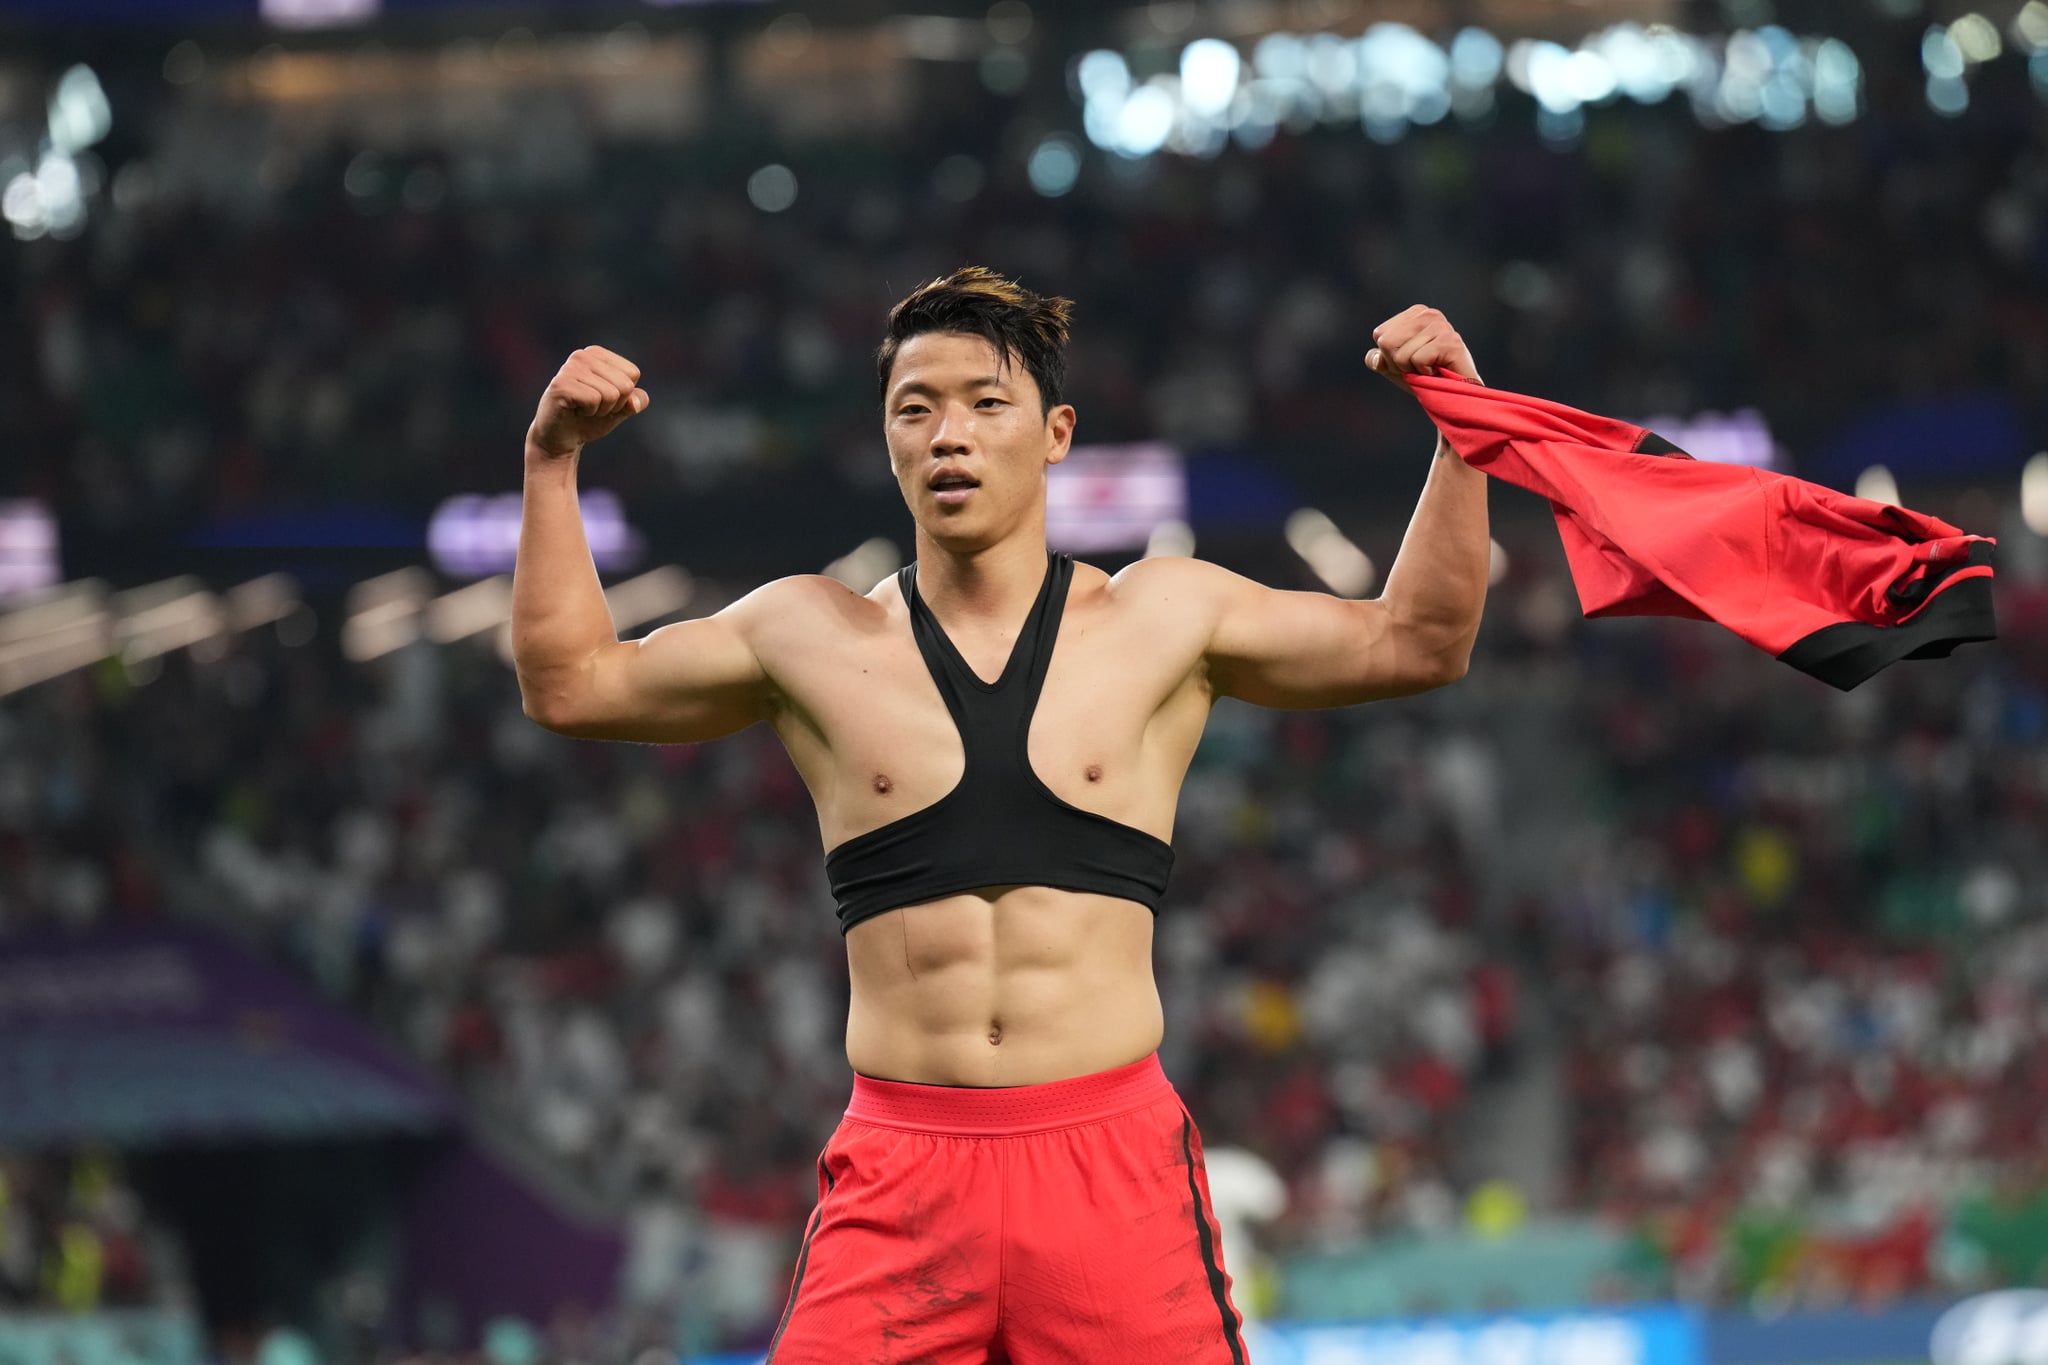 AL RAYYAN, QATAR – DECEMBER 02: Hwang Hee-chan of Korea celebrates after scoring his second goal during the Group H match of FIFA World Cup Qatar 2022 between Korea Republic and Portugal at Education City Stadium on December 02, 2022 in Al Rayyan, Qatar scored.  (Photo by Amin Mohammad Jamali/Getty Images)